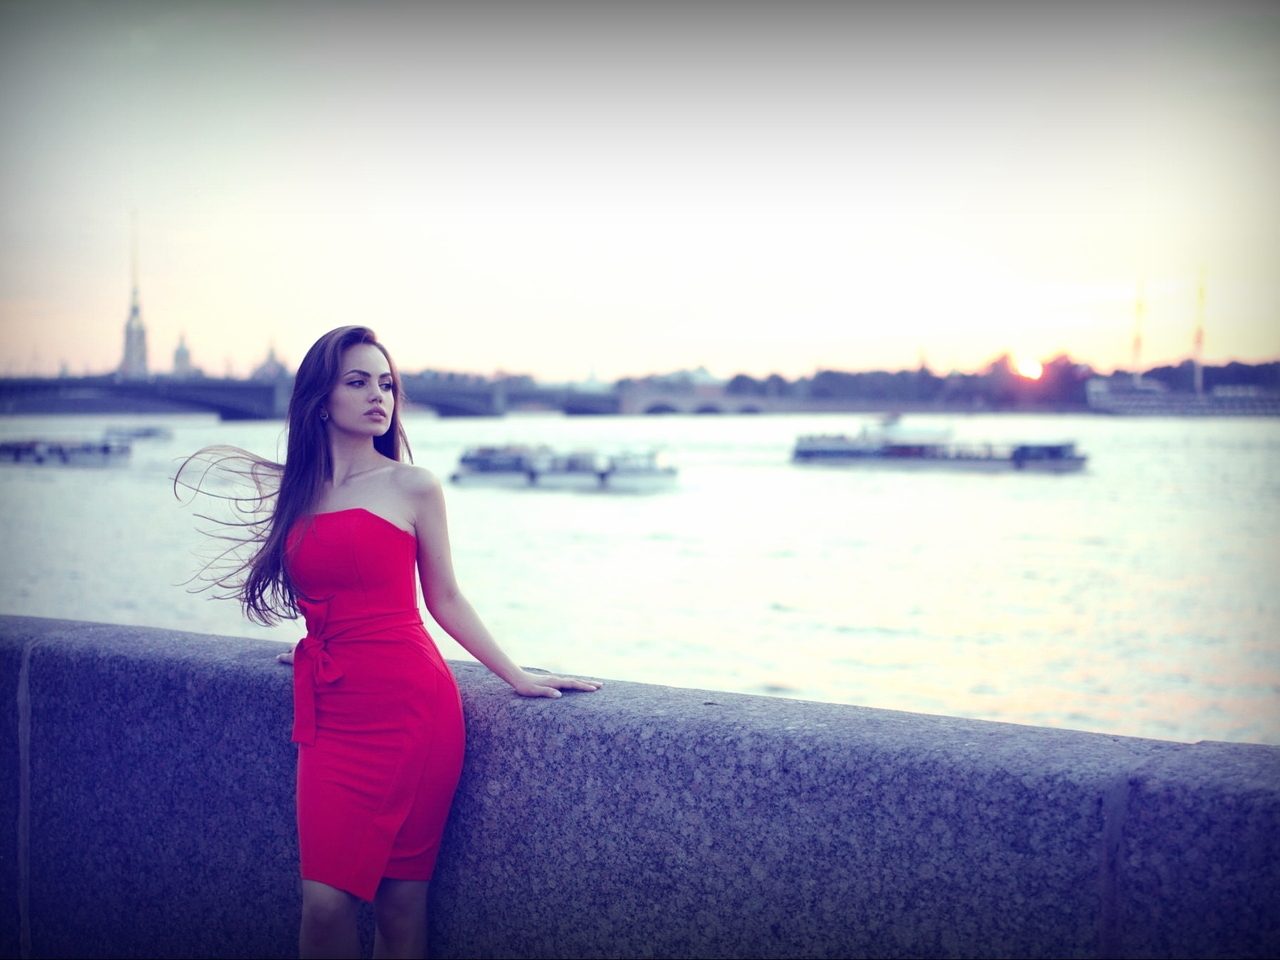 Image: Girl, brunette, long hair, red dress, figure, posing, river, water, waterfront, blurred background